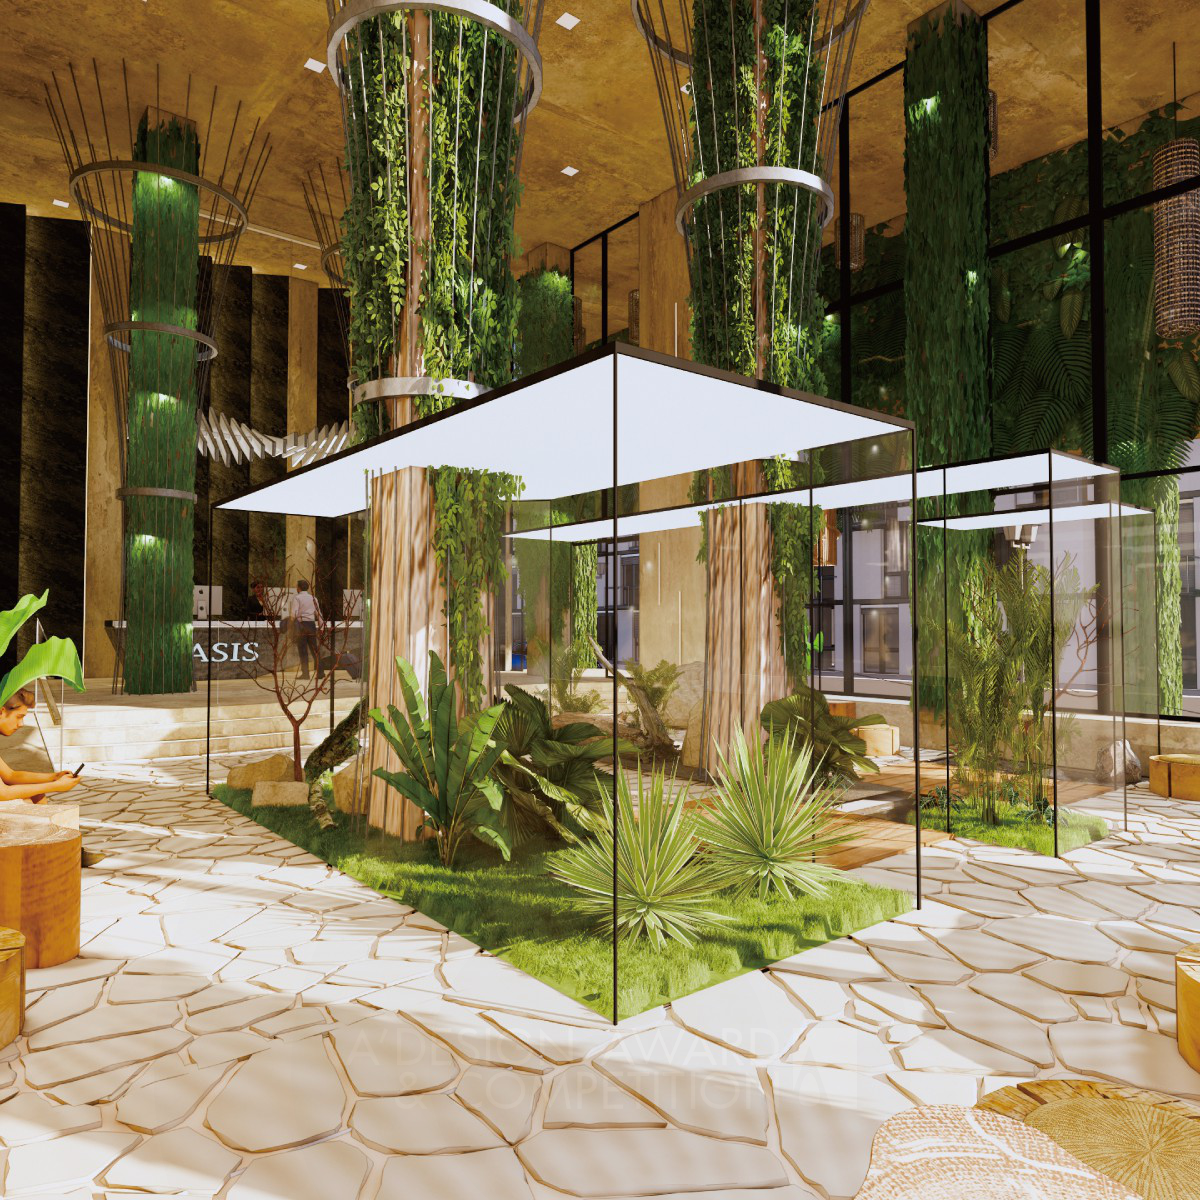 Oasis: A Sustainable Hotel that Blends Nature and Architecture